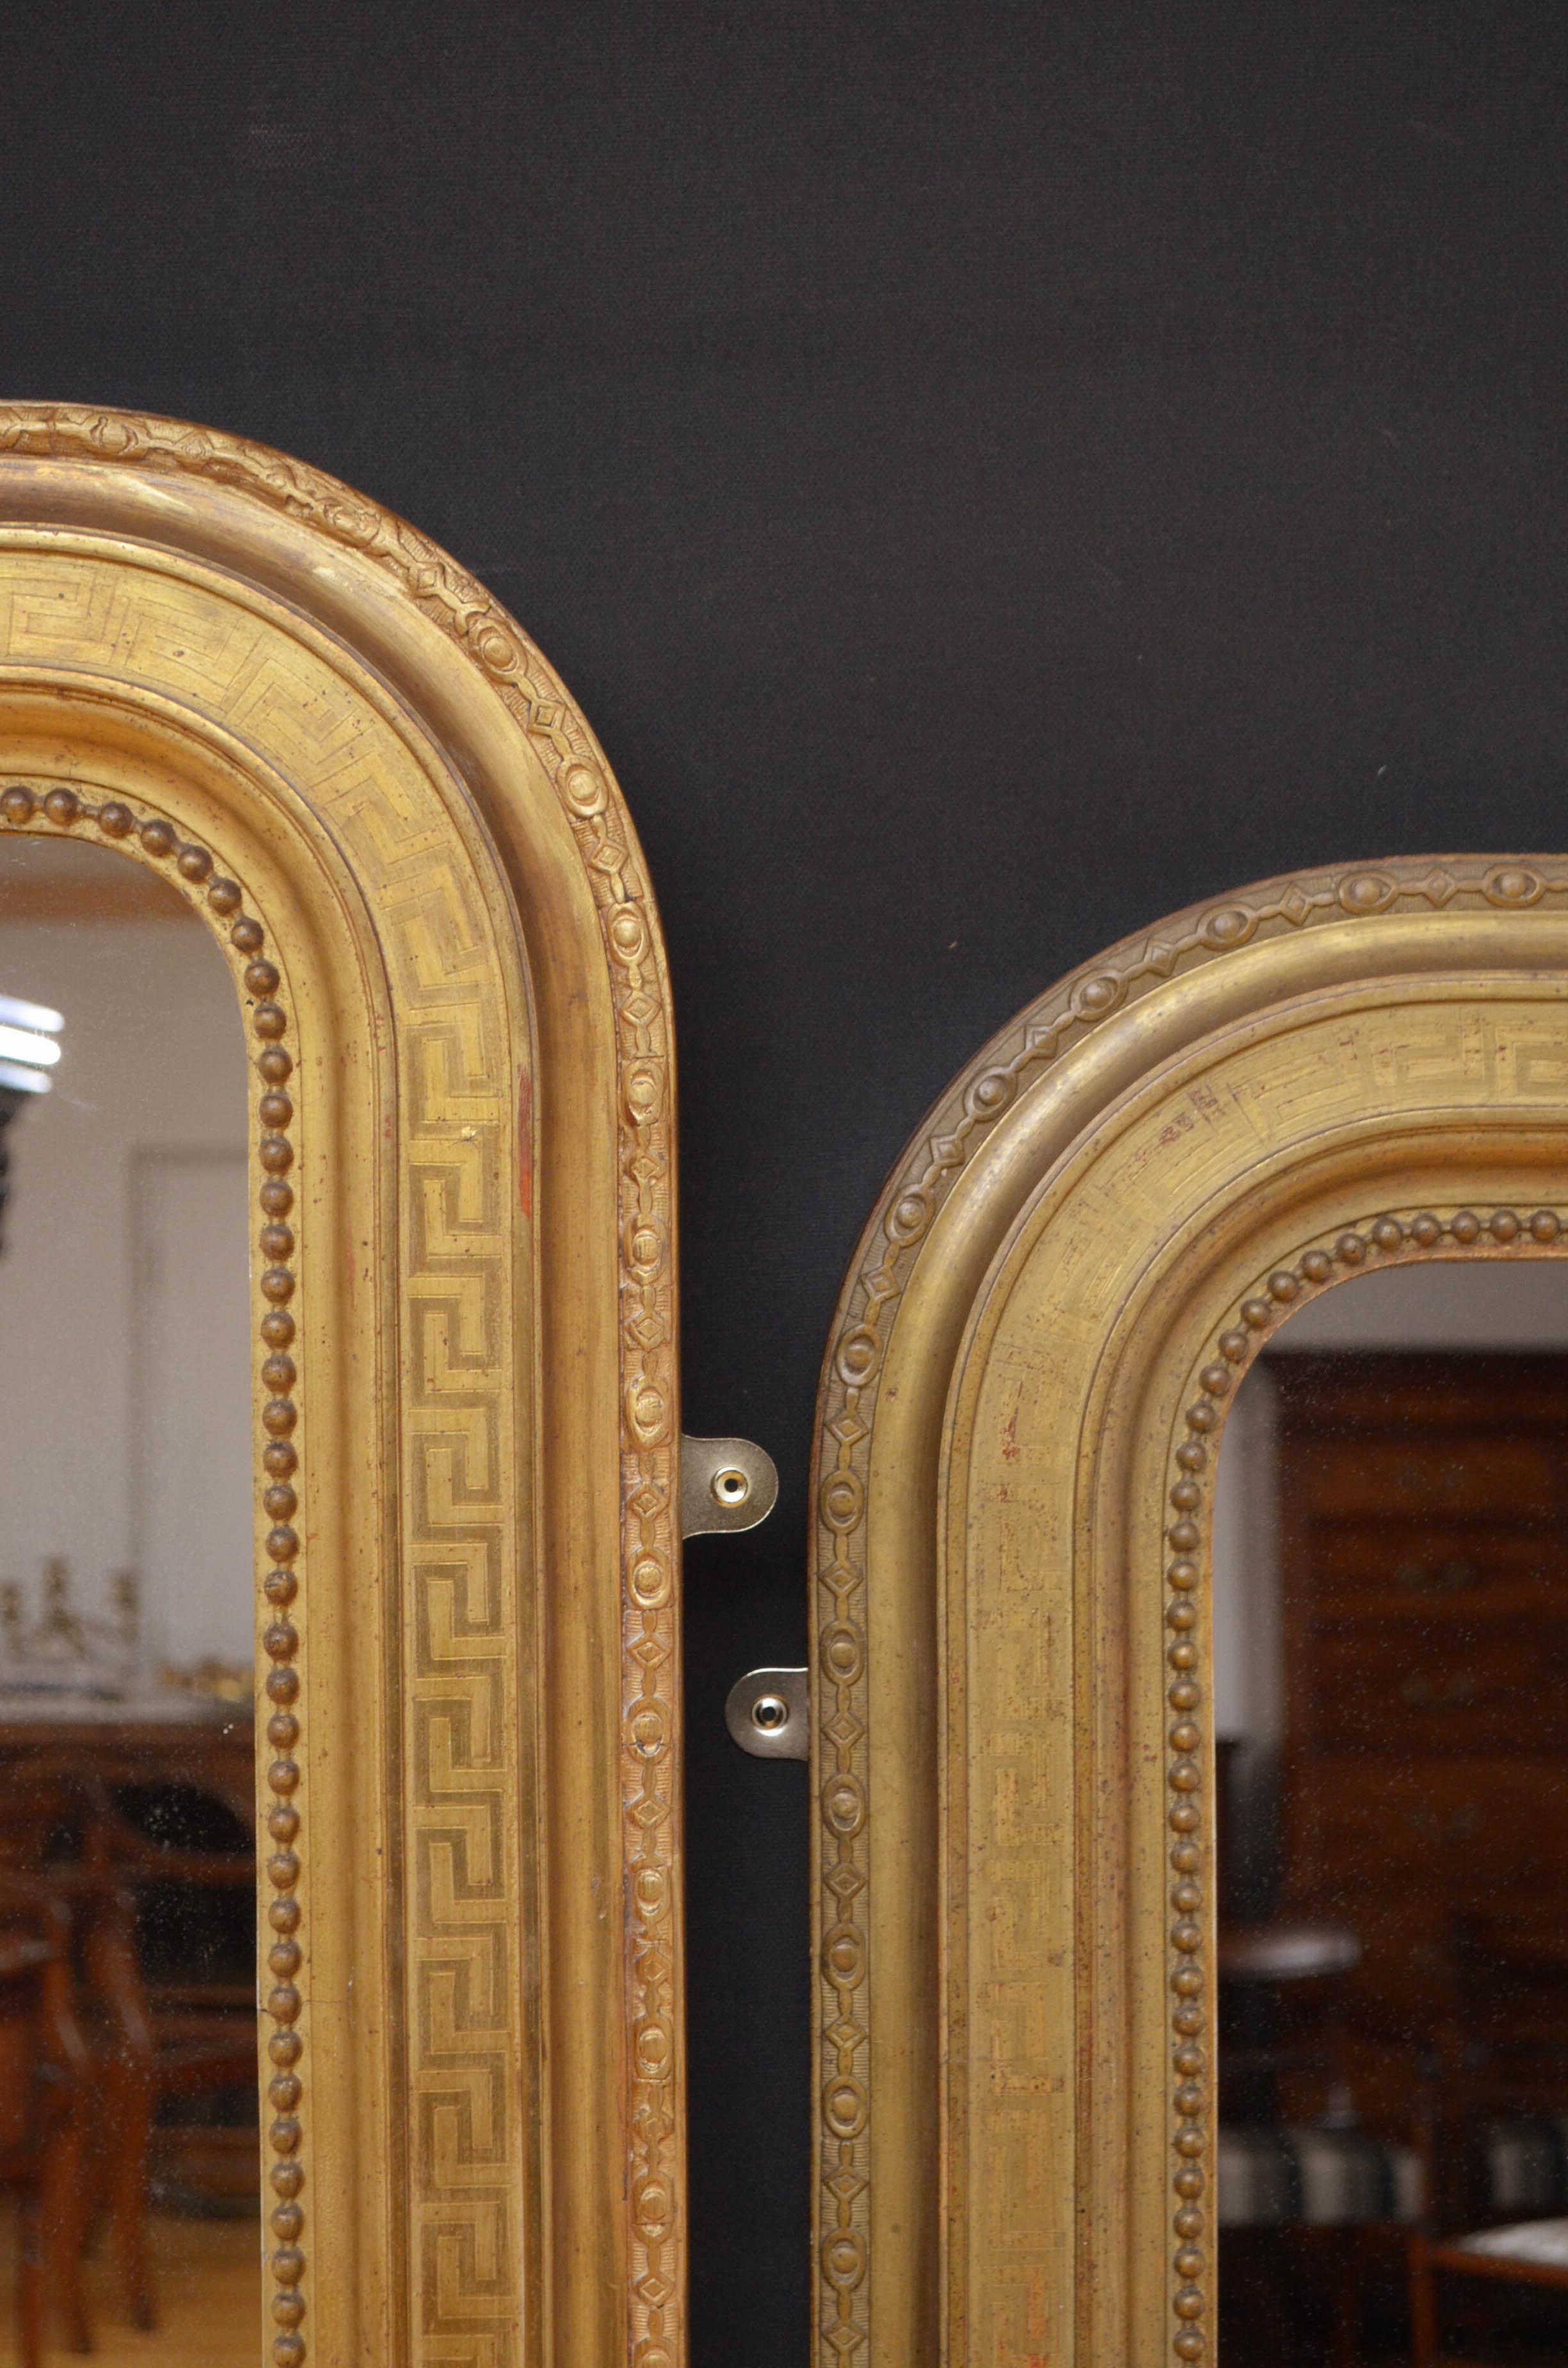 Sn4802 pair of French gilded wall mirrors, each having original glass with some foxing in beaded, Greek key decorated and carved giltwood frame. This pair of mirrors retains original glass, gilt and backboards all in fantastic home ready condition,